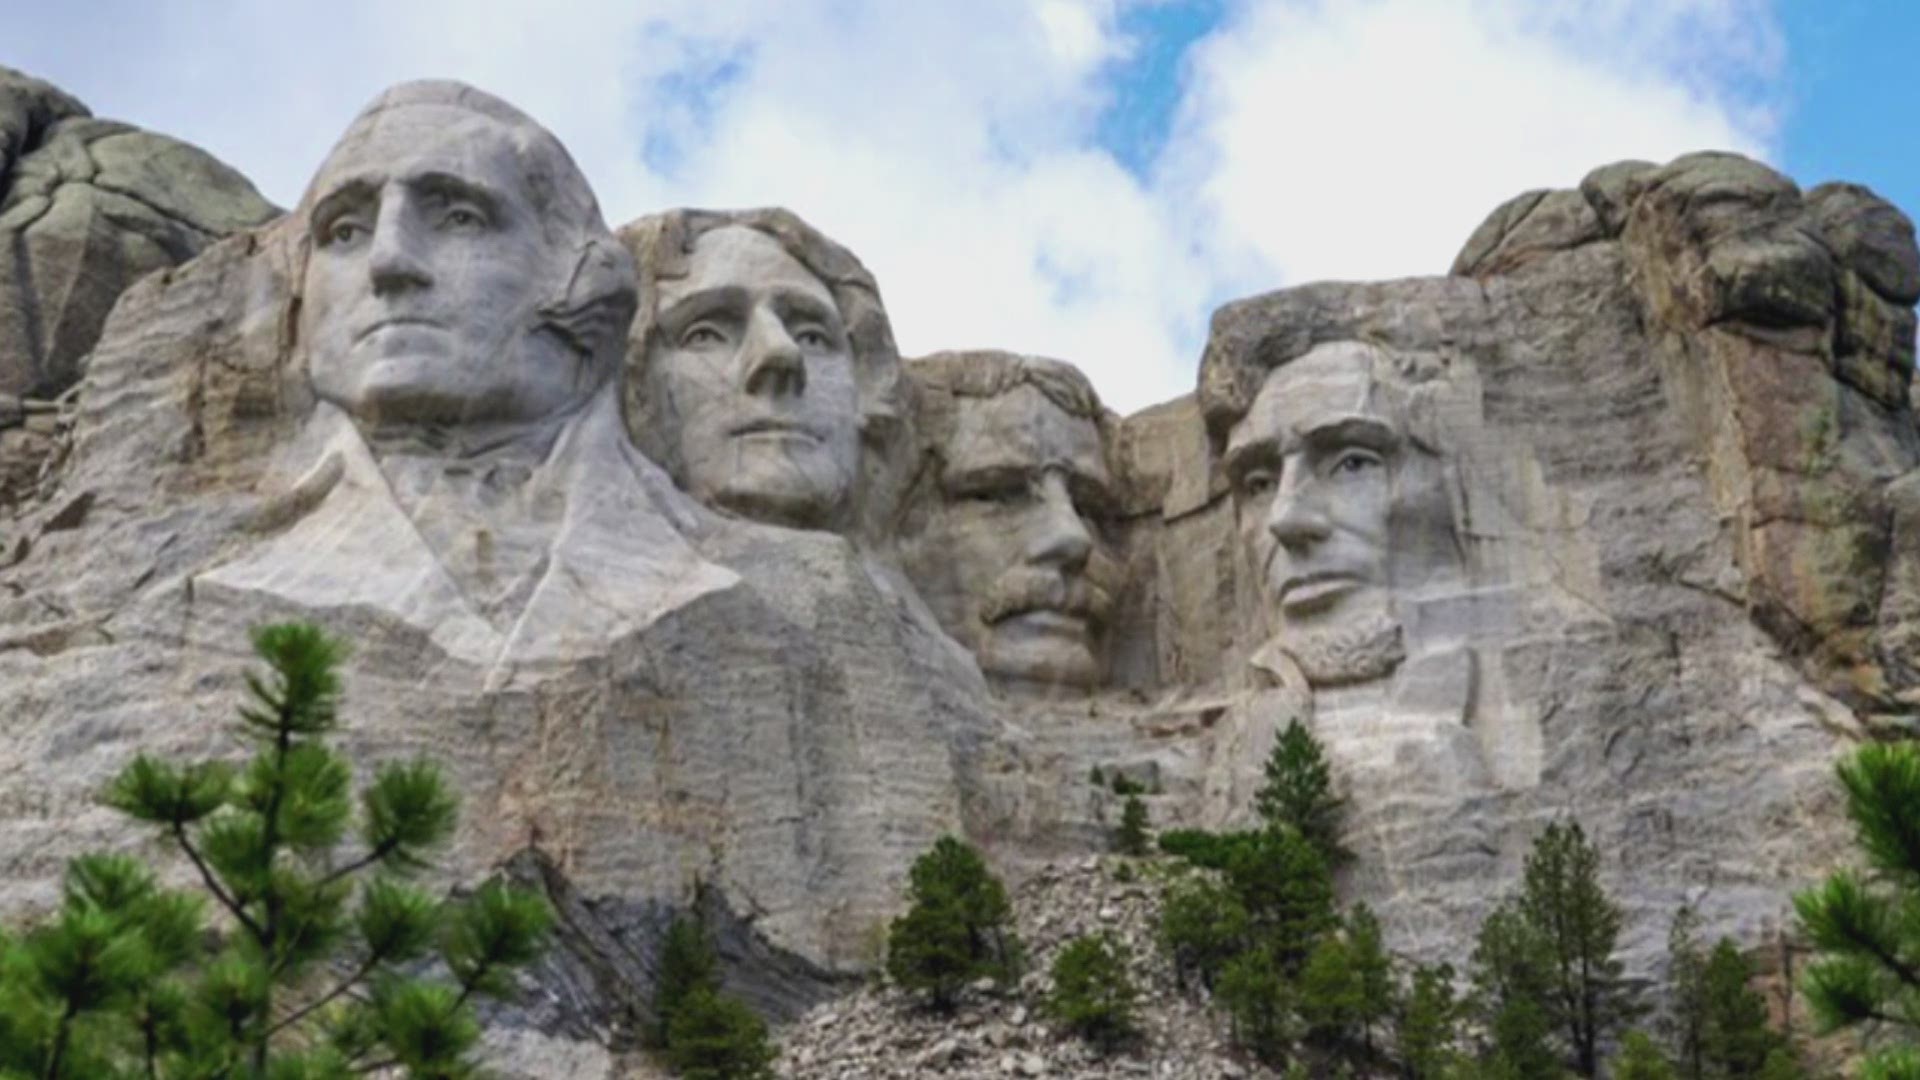 HOMAGE on X: Who would you put on your city's Mount Rushmore of